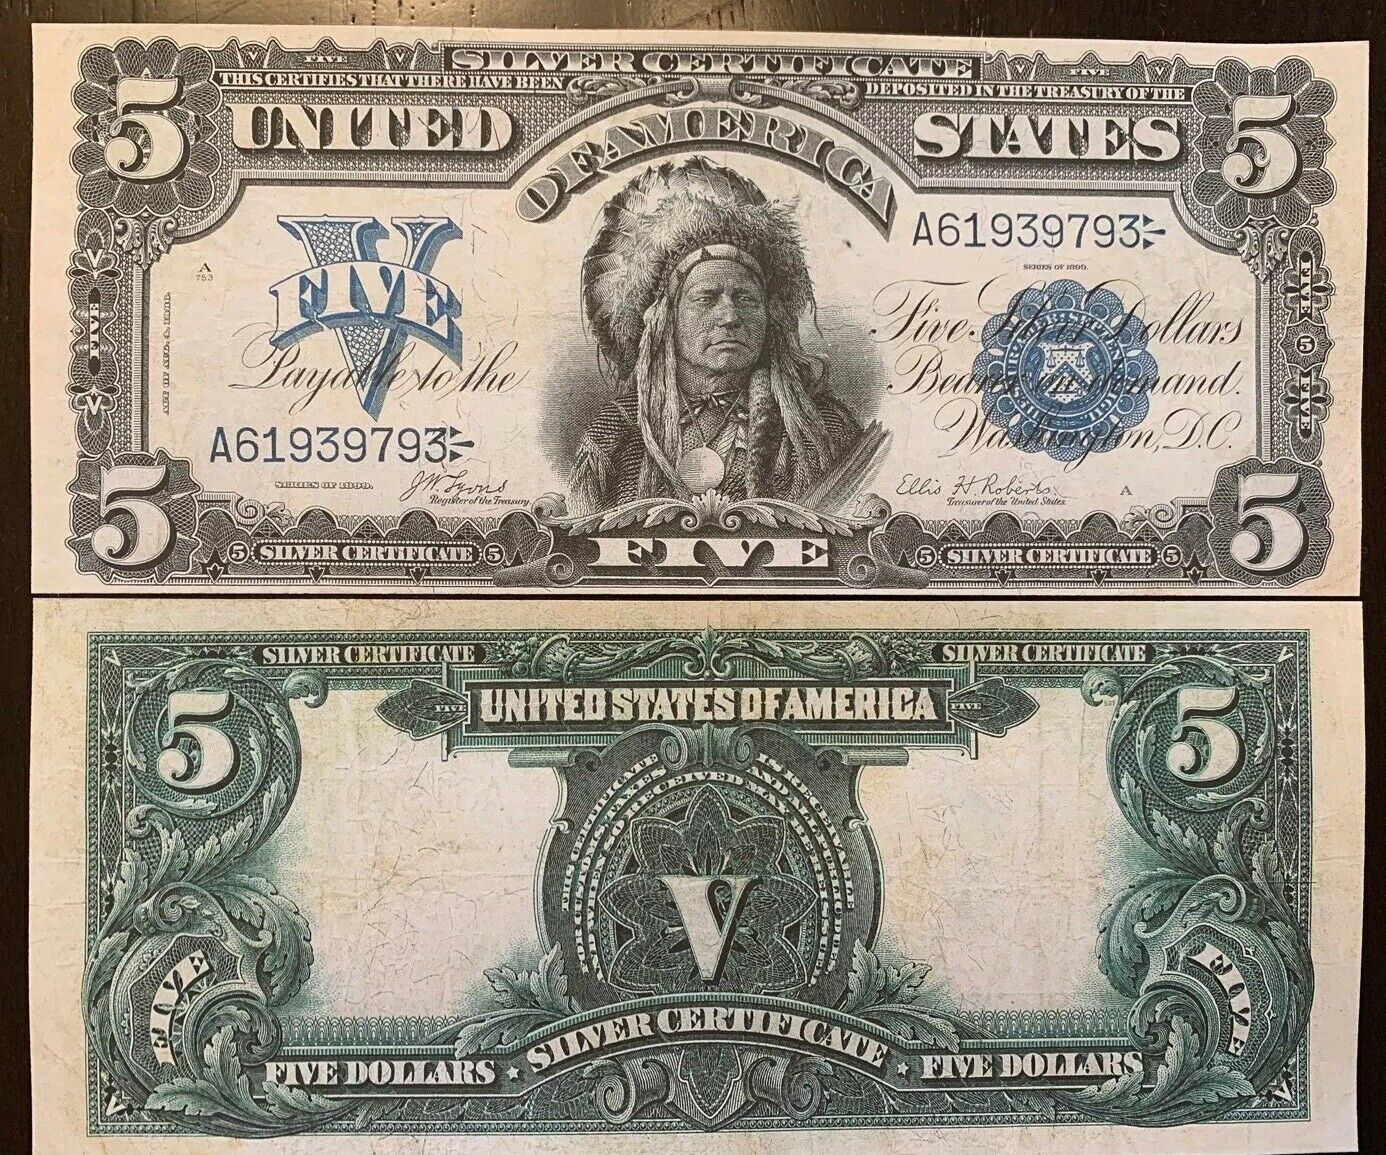 Primary image for Reproduction 1899 United States $5 Bill Silver Certificate Indian Chief Copy